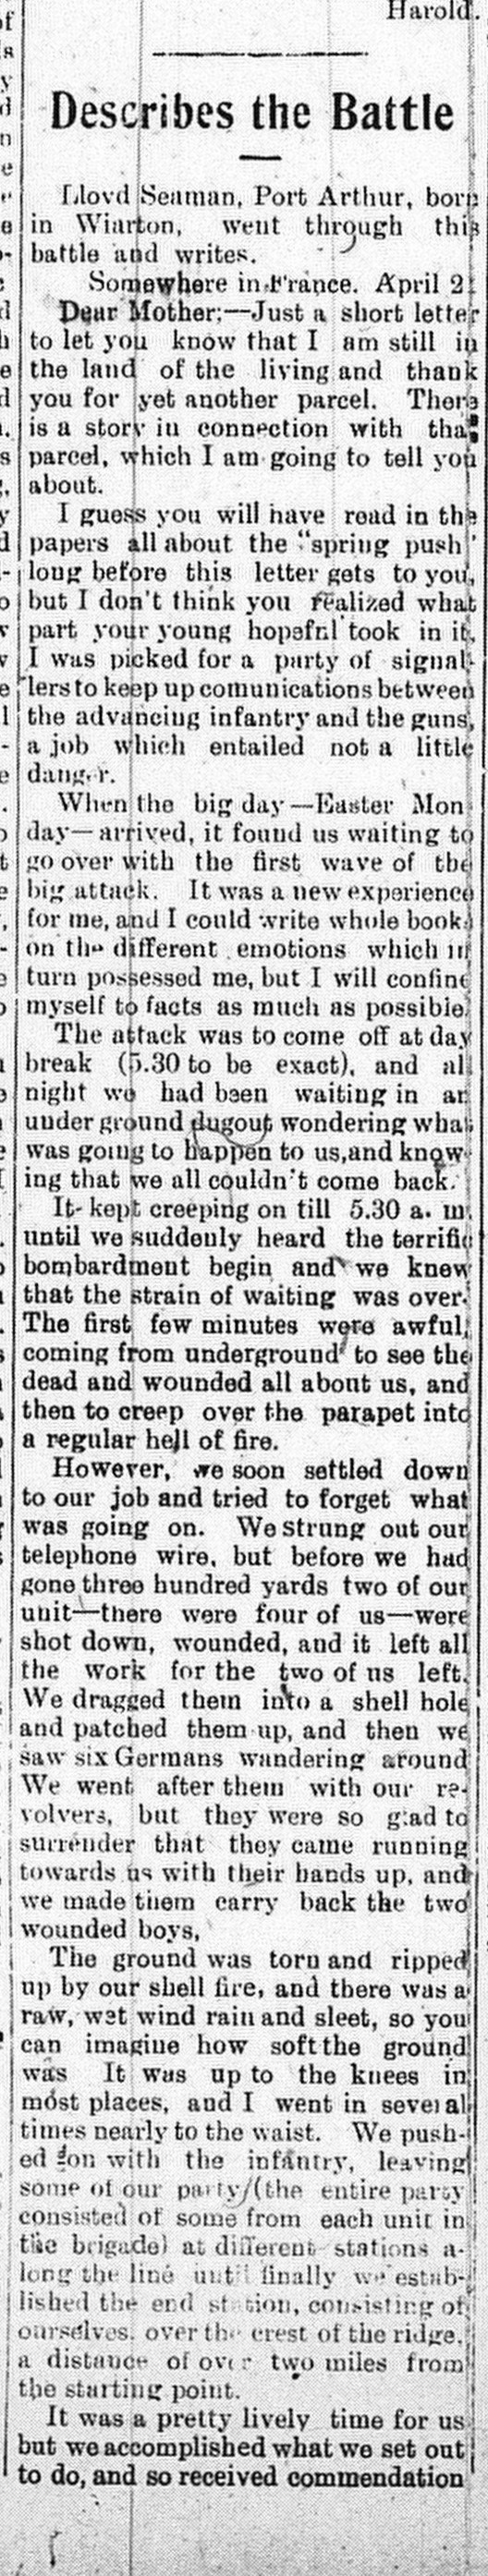 Canadian Echo, May 30, 1917, p. 1, part 1 of 2